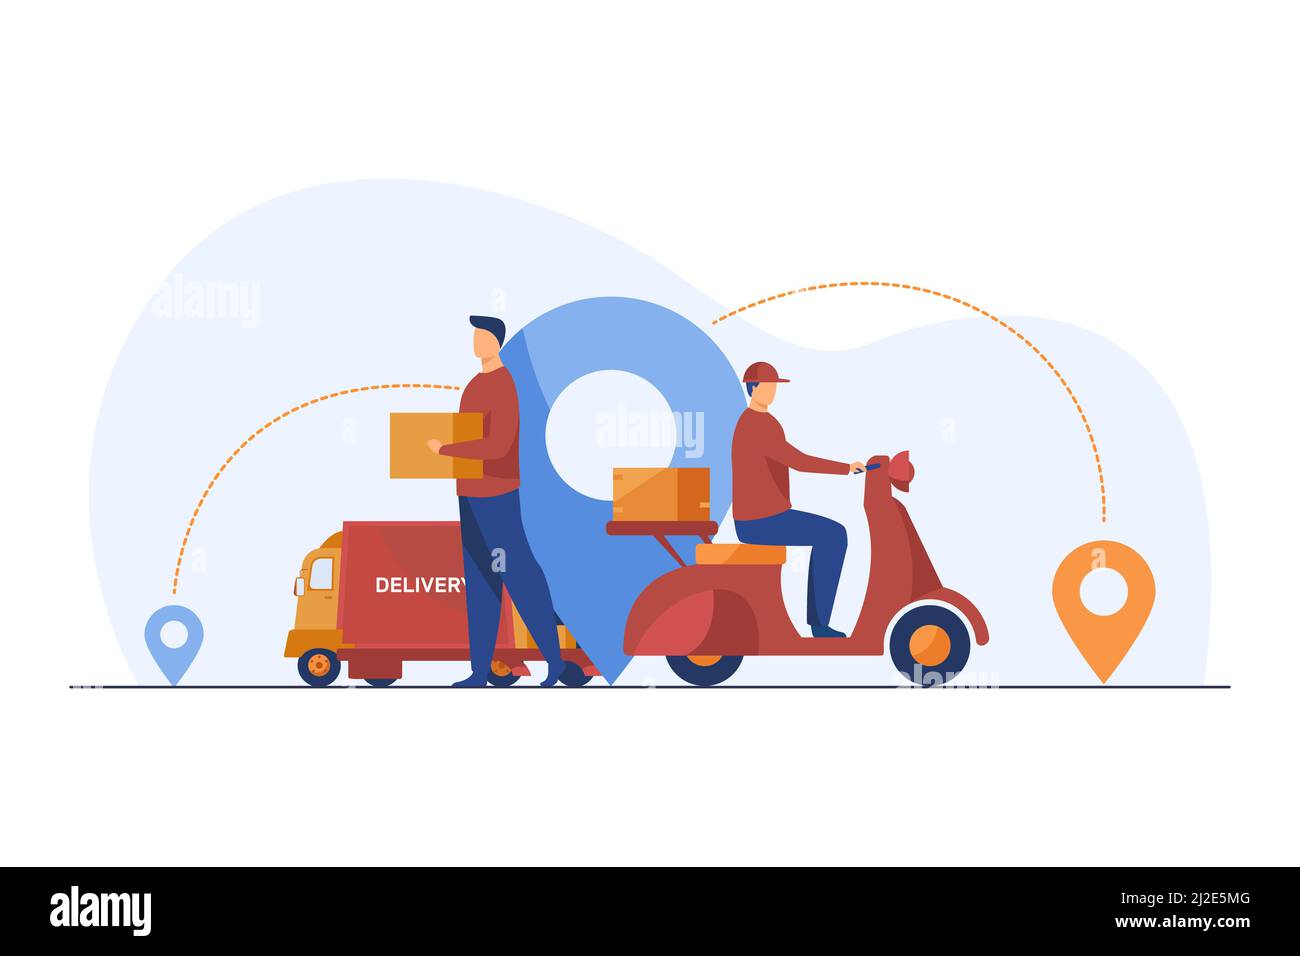 Male couriers delivering parcels. Scooter, truck, map pointers flat vector illustration. Shipping, logistics, service concept for banner, website desi Stock Vector